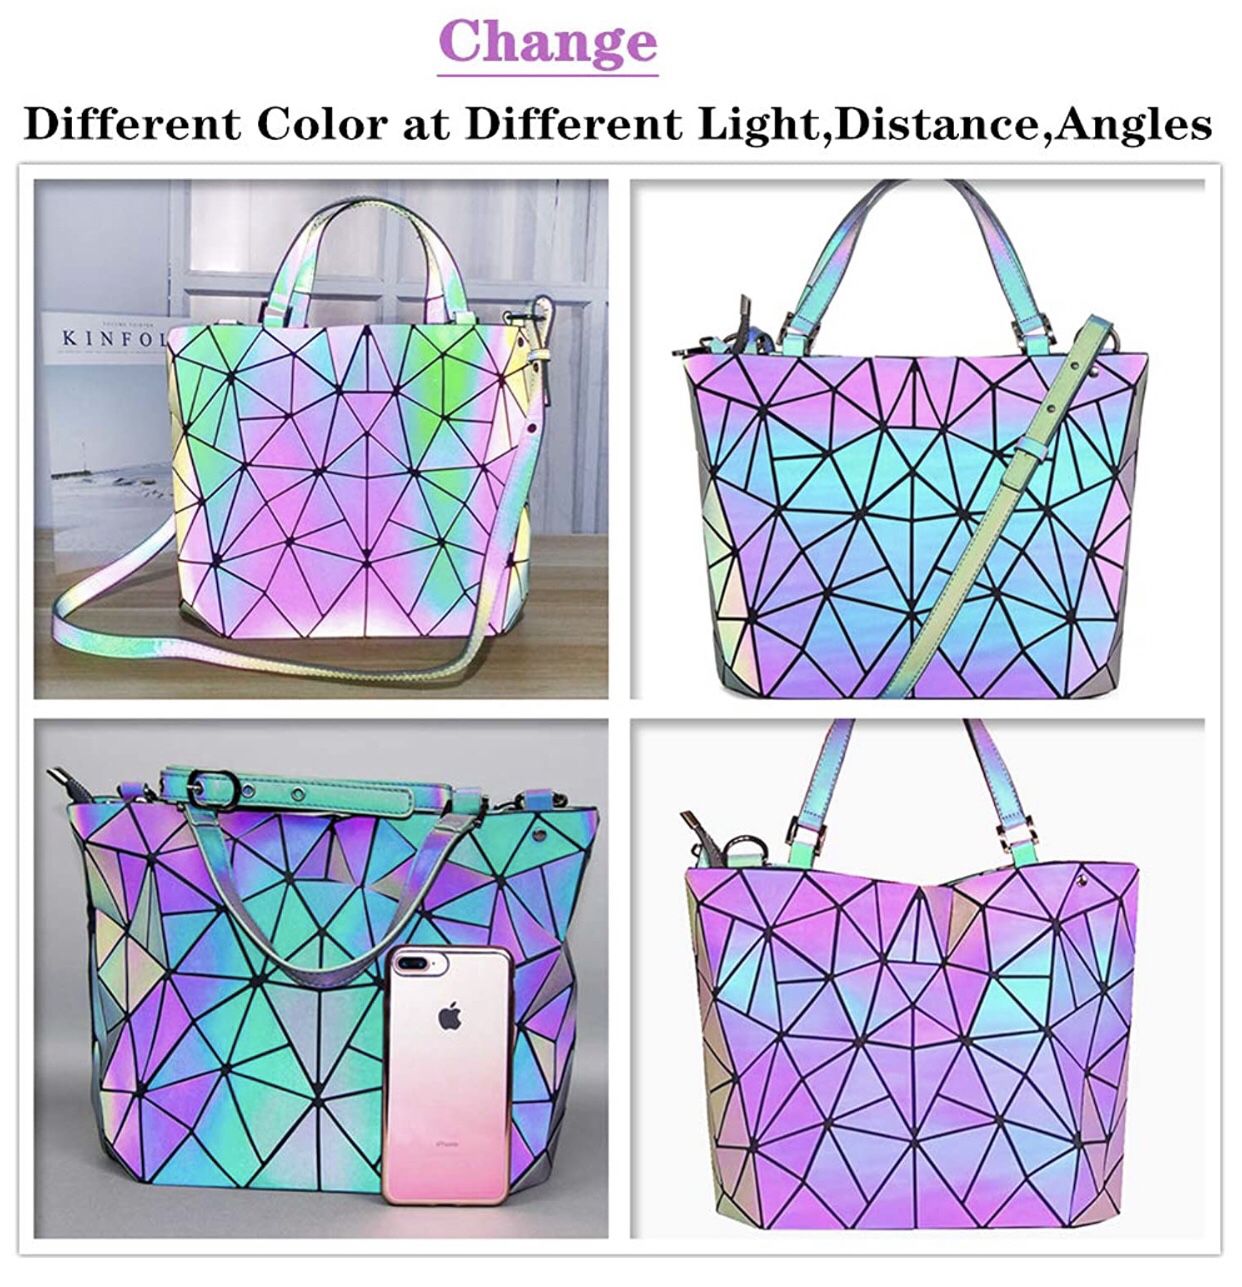 Luminous Geometric Purses for Women Crossbody Bags for Women Backpack Fanny Pack Tote bag Wallet Collection Amazon's Choice 